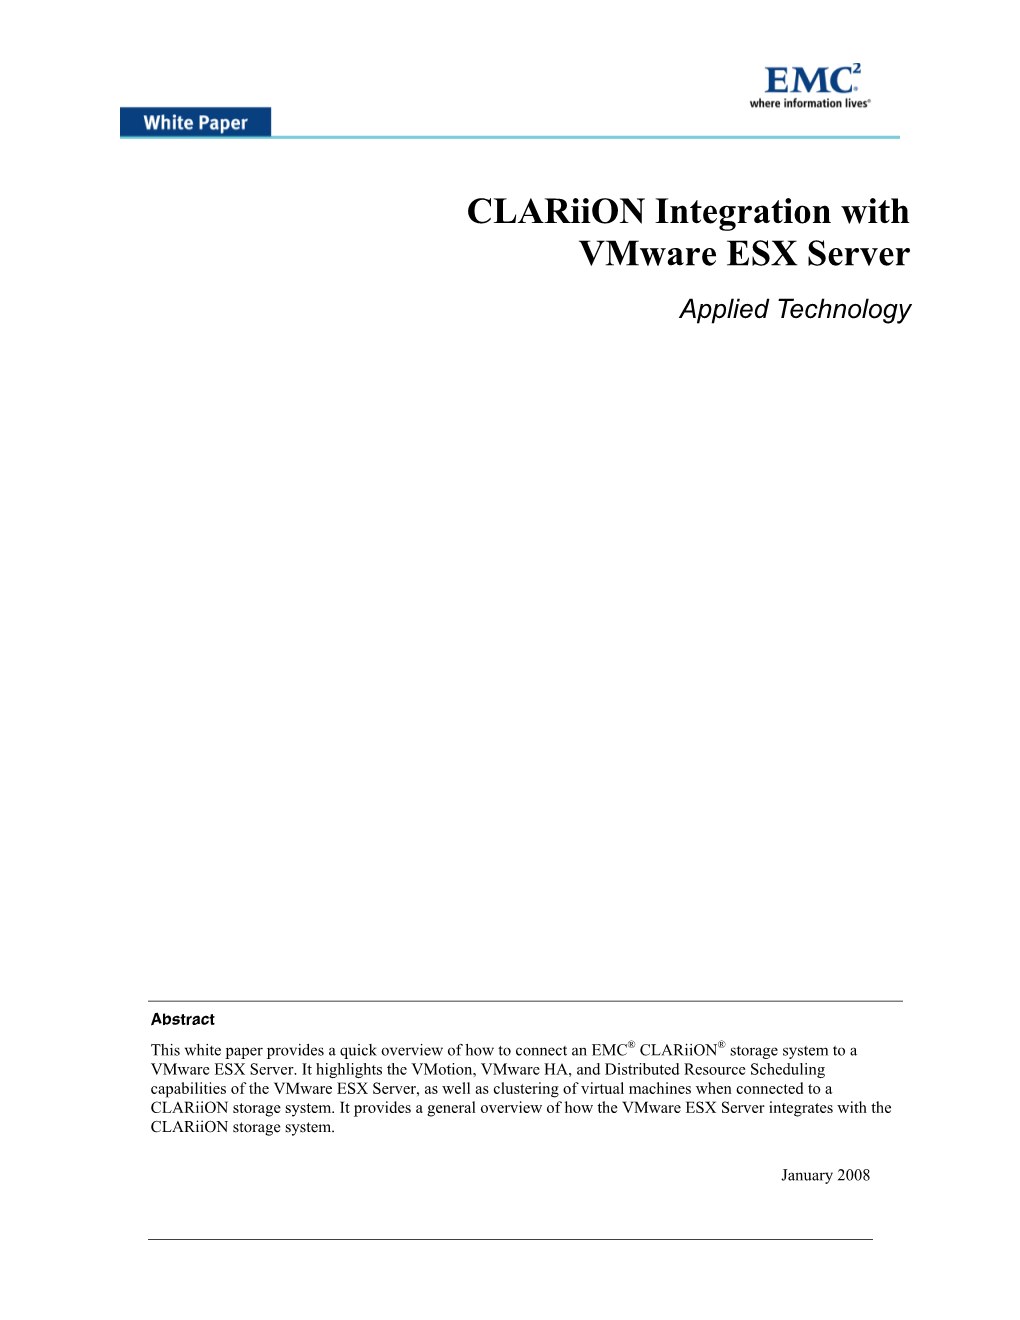 Clariion Integration with Vmware ESX Server Applied Technology